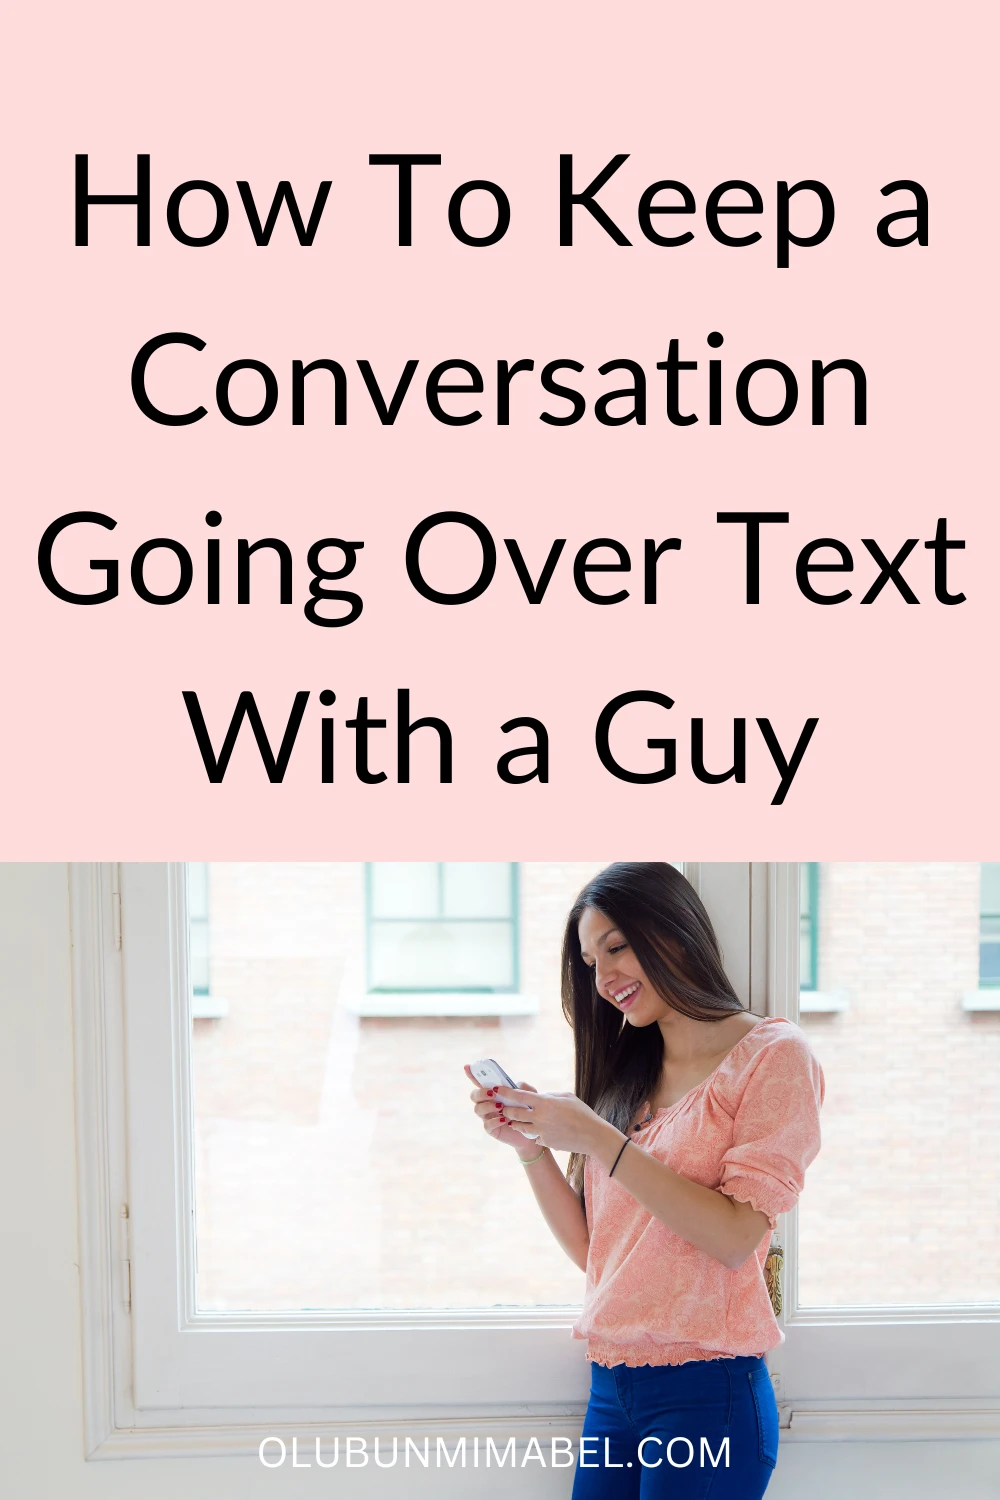 How to Keep a Conversation Going Over Text With a Guy